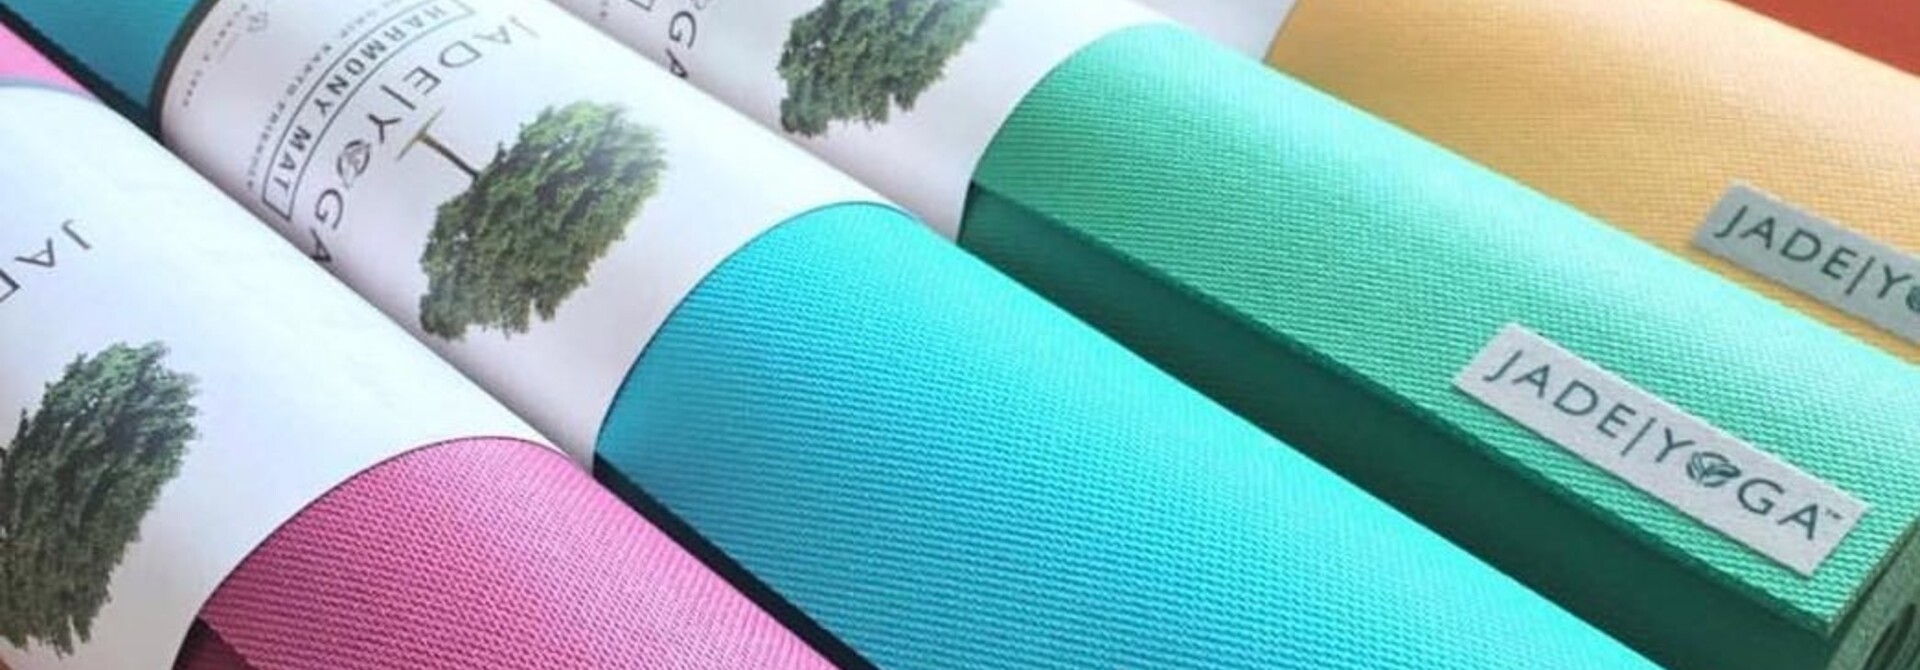 How to pick the right yoga mat?